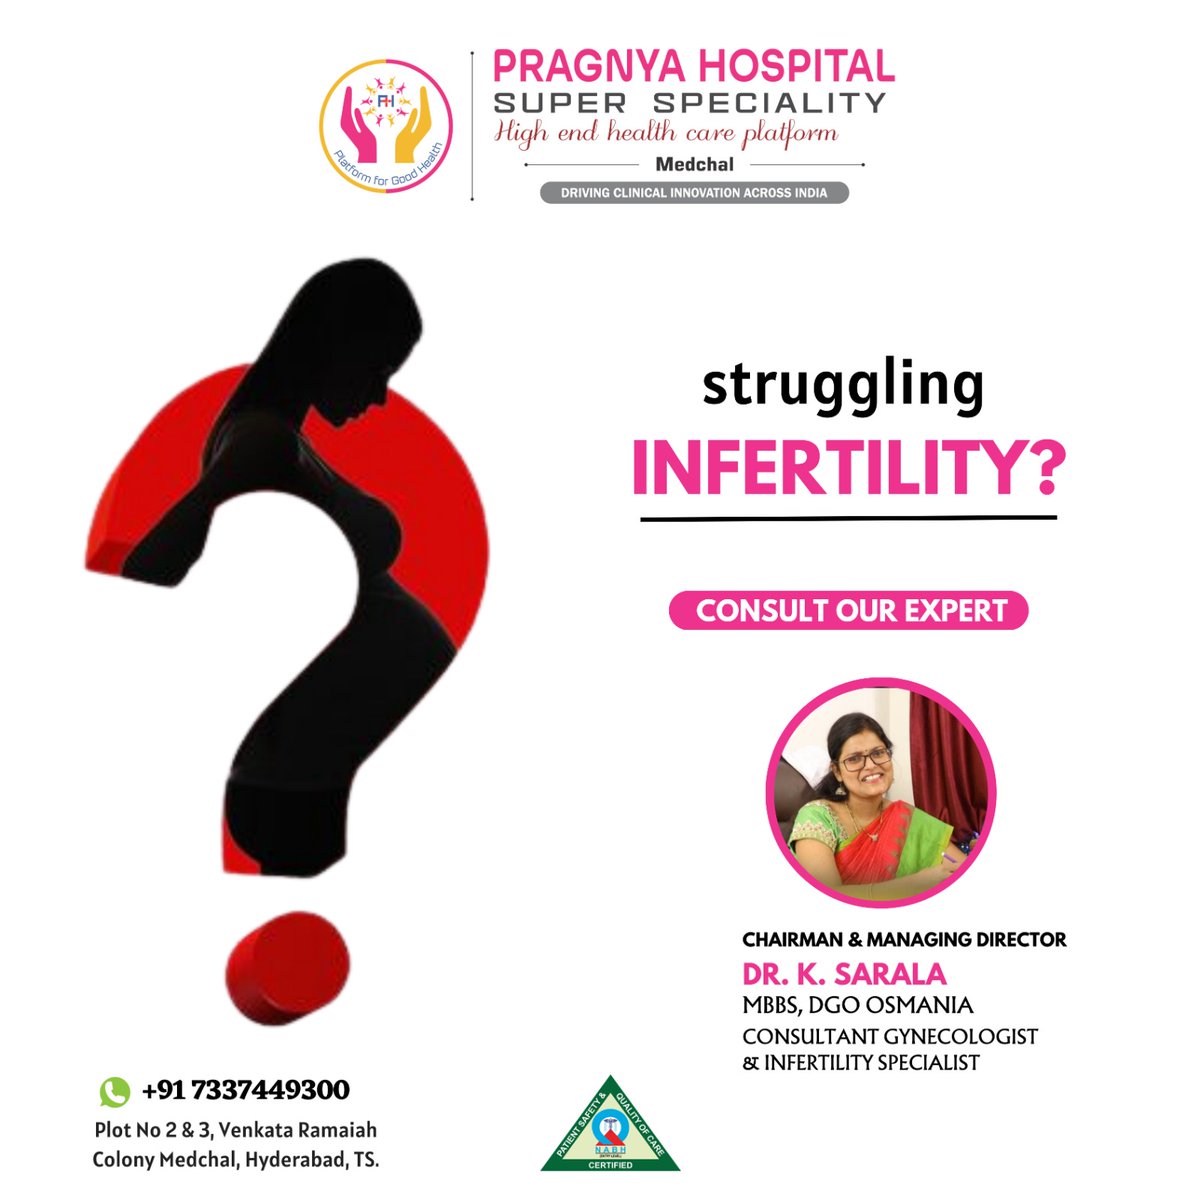 Welcome to Pragnya Hospital, a leading fertility hospital dedicated to helping couples achieve their dream of parenthood. 
#pragnyasuperspecialityhospital #bestsuperspecialtyhospital #FertilityHospital #Parenthood #ExpertiseAndExperience #AdvancedDiagnosticTechniques #Holistic